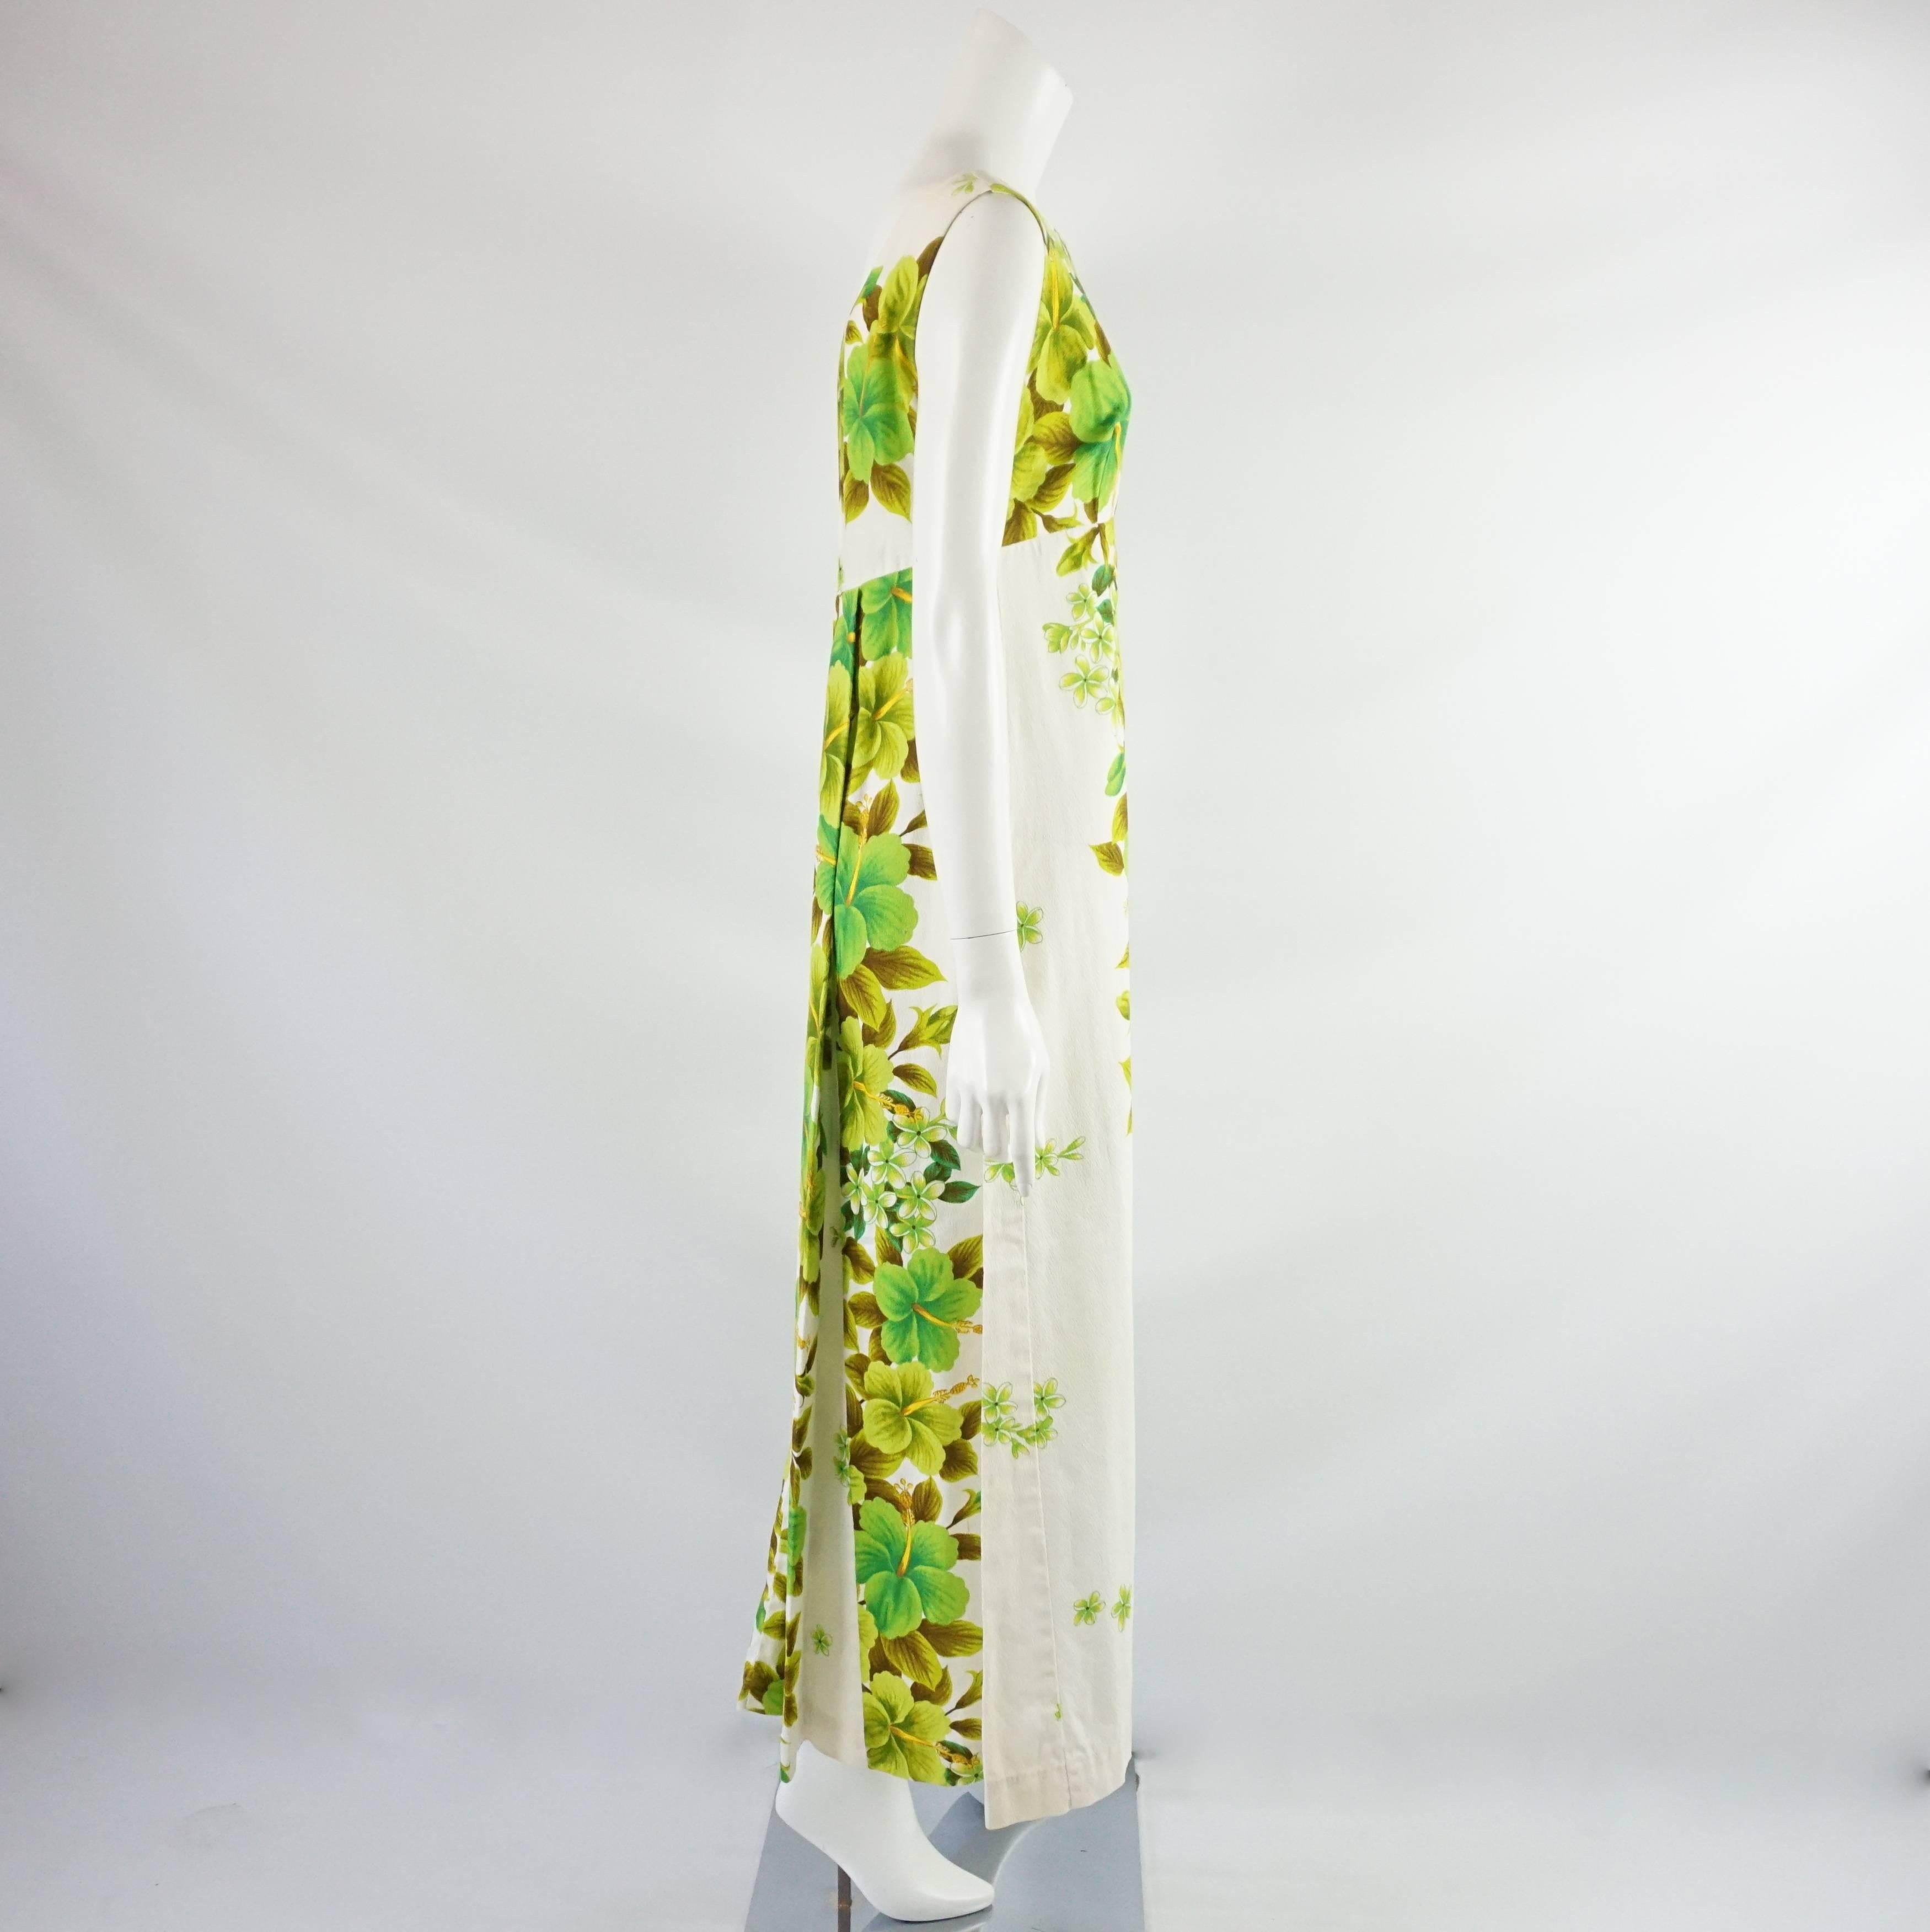 This fun, summer maxi dress made of cotton with a large green Hawaiian flower print. The dress is from Ui Maikai, which is from Hawaii, and is sleeveless. It is in excellent vintage condition with minor wear as seen in the last image. Size 6, circa